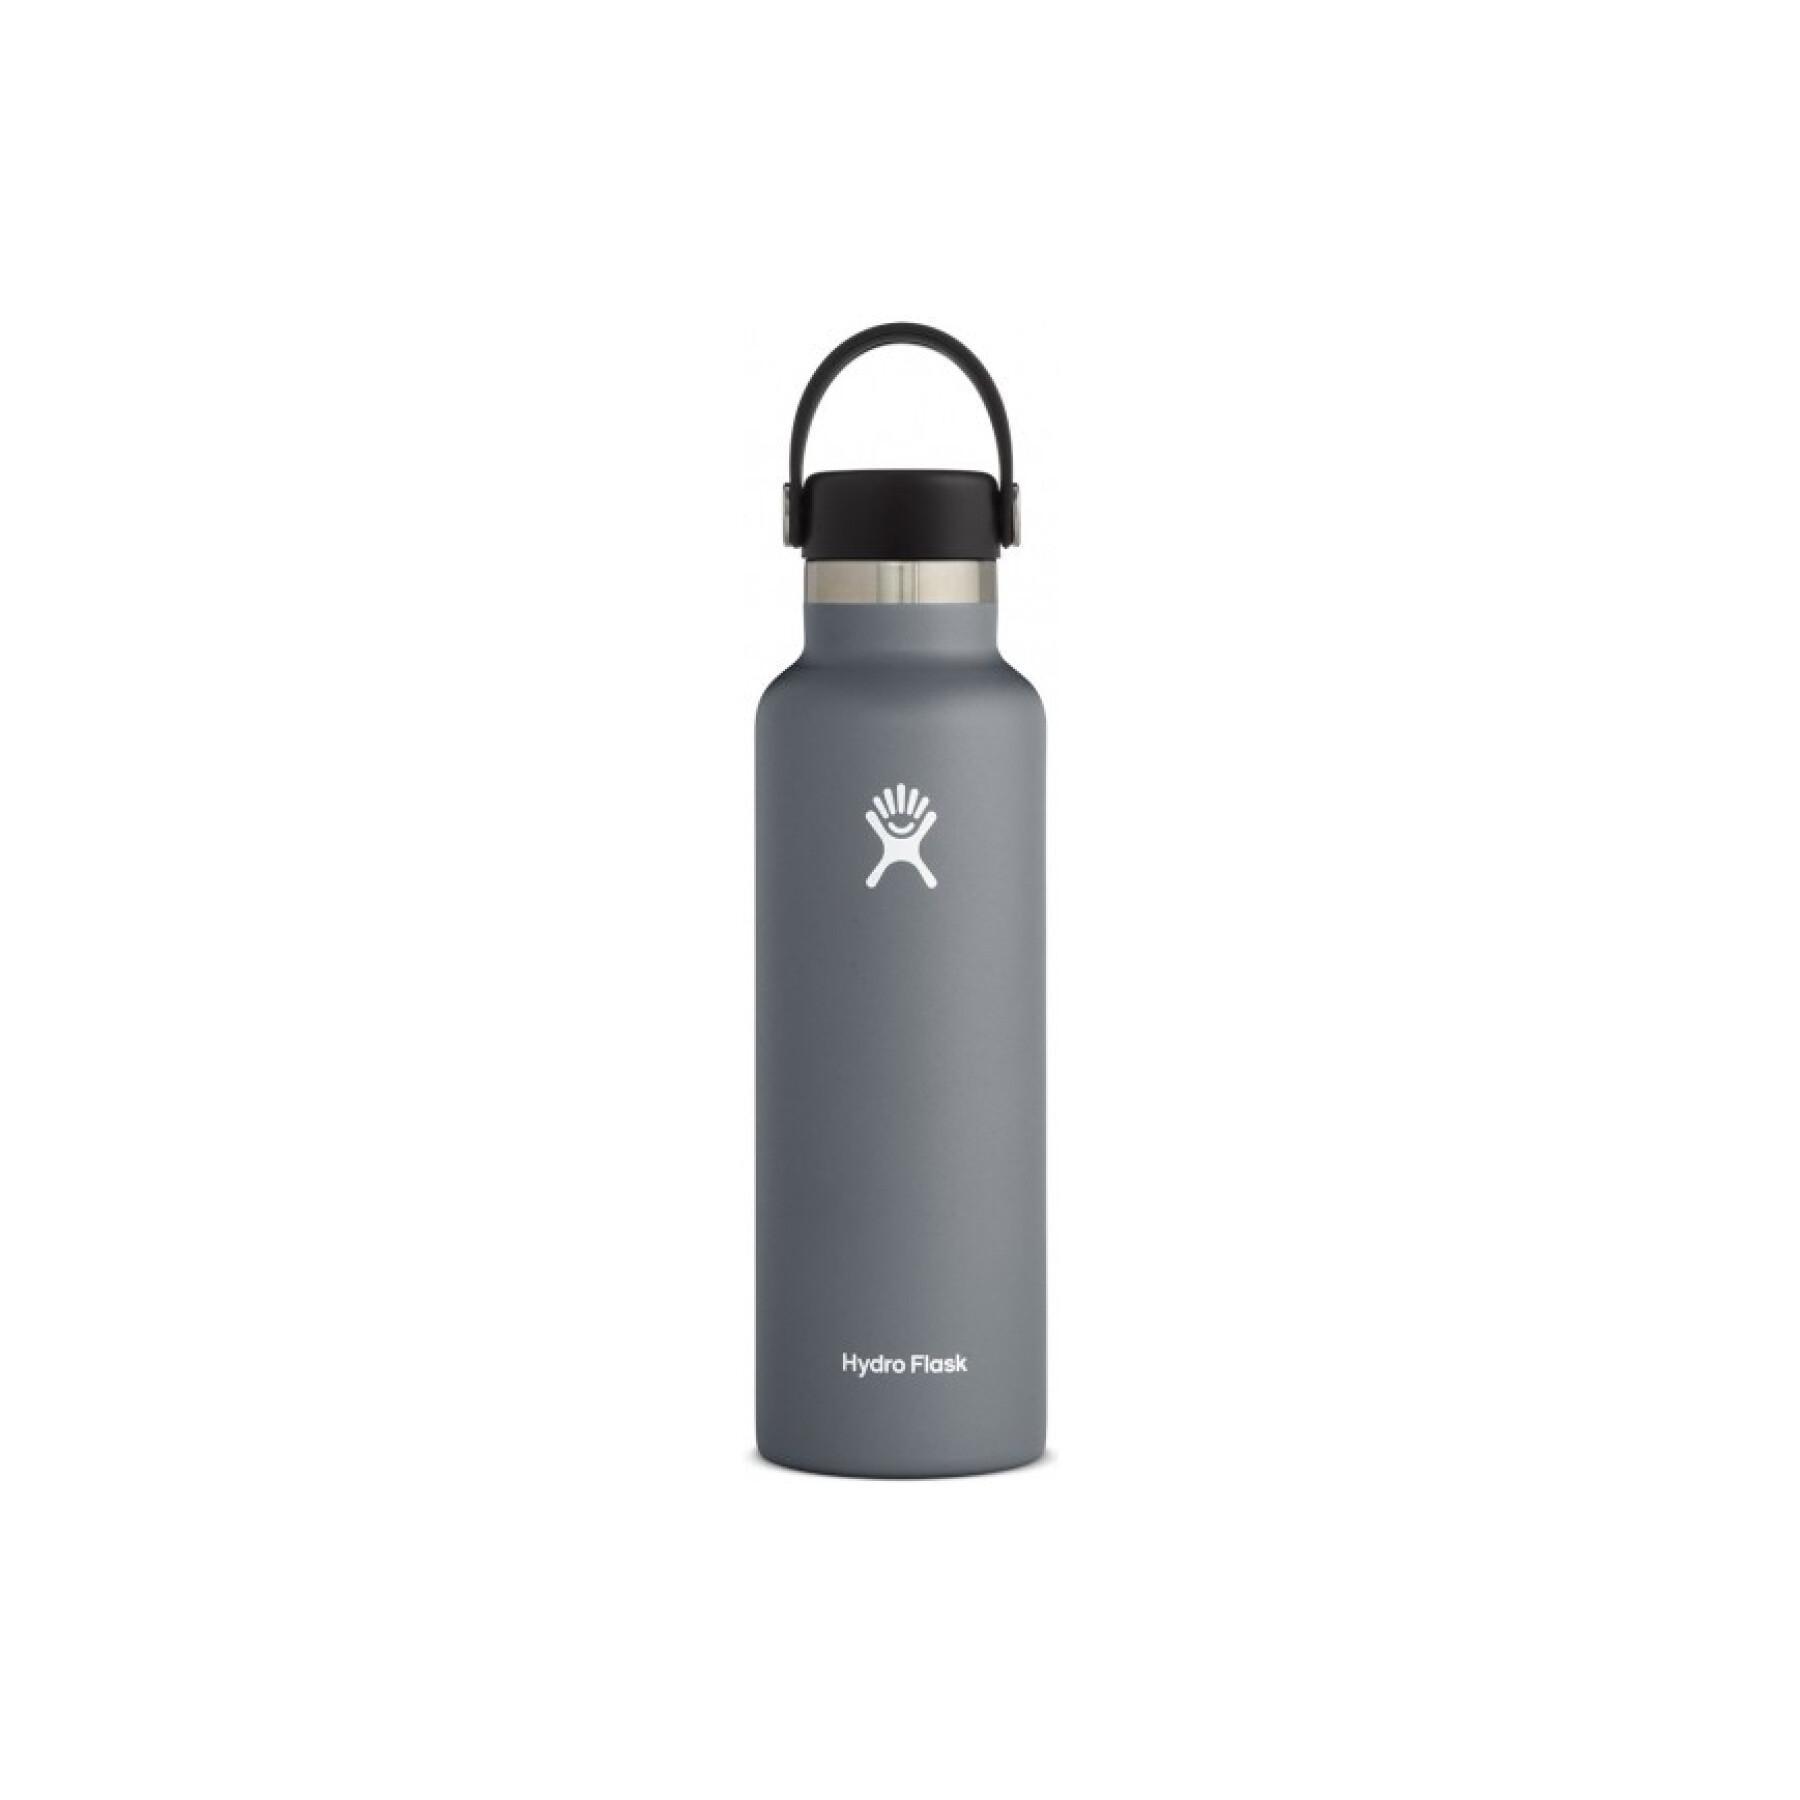 Standard thermos Hydro Flask with standard mouth flew cap 24 oz